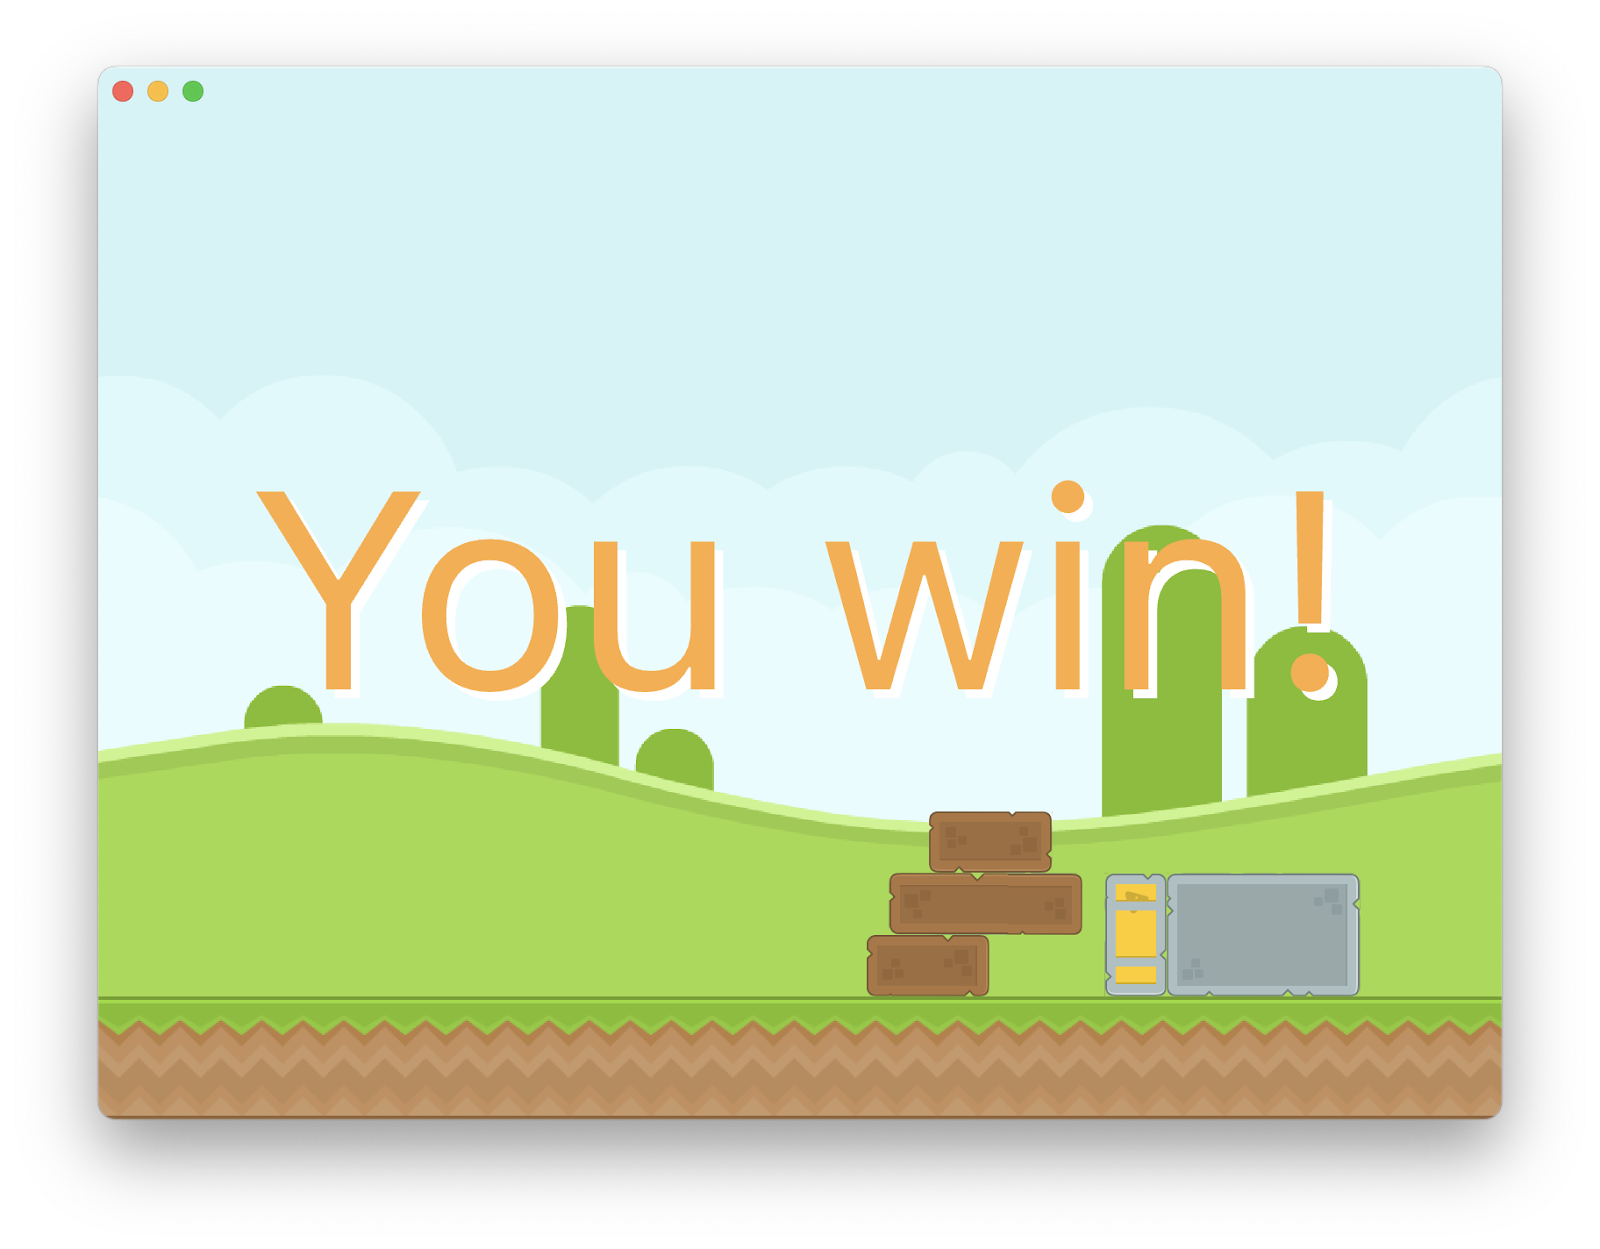 An app window with green hills in the background, ground layer, blocks on the ground and a text overlay of 'You win!'